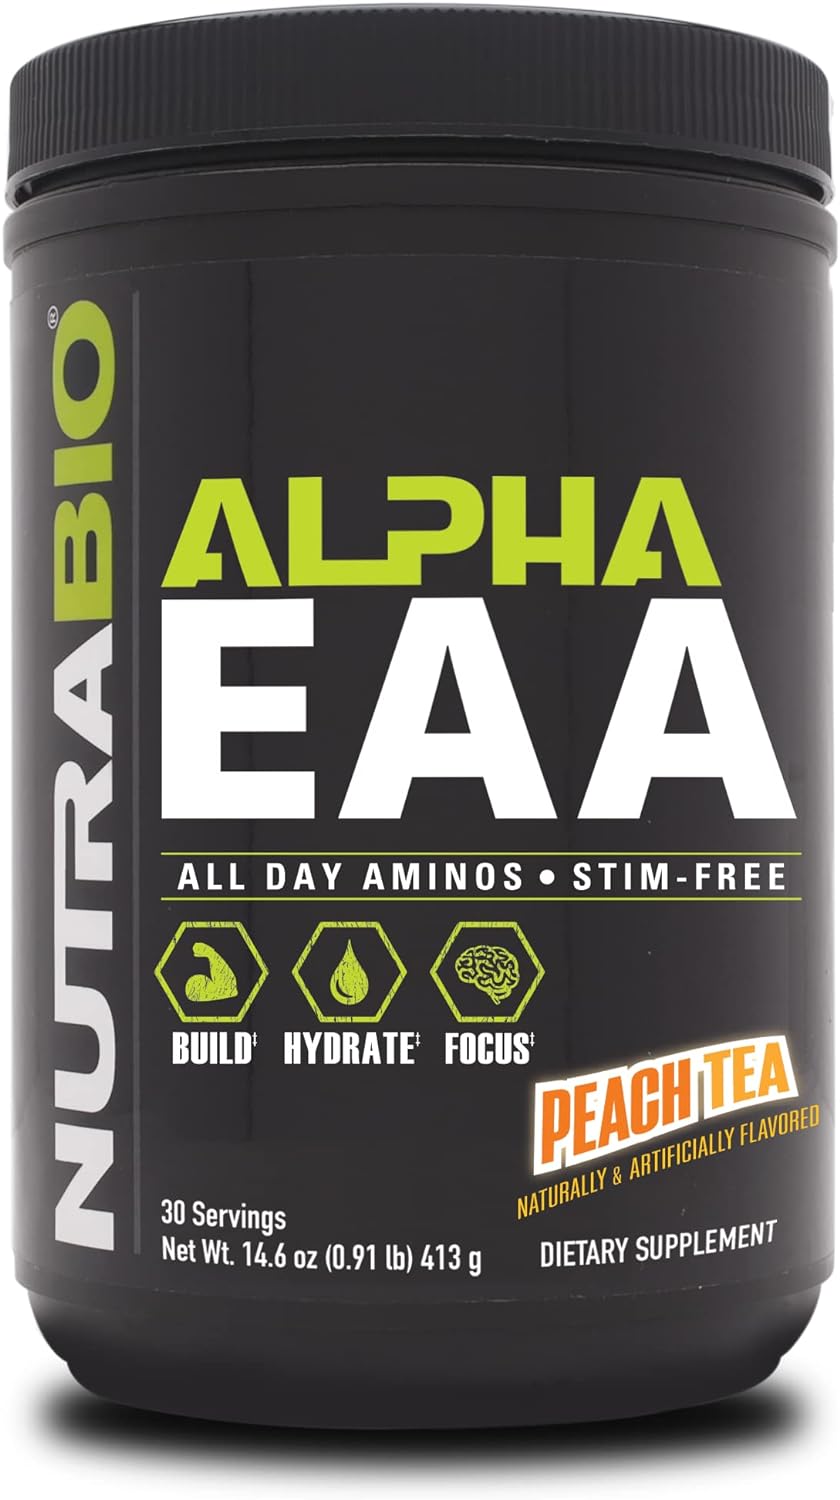 NutraBio Alpha EAA Hydration and Recovery Supplement - Full Spectrum EAA BCAA Matrix with Electrolytes, Nootropics, Coconut Water - Recovery, Energy, Focus, and Hydration Supplement - Peach Tea